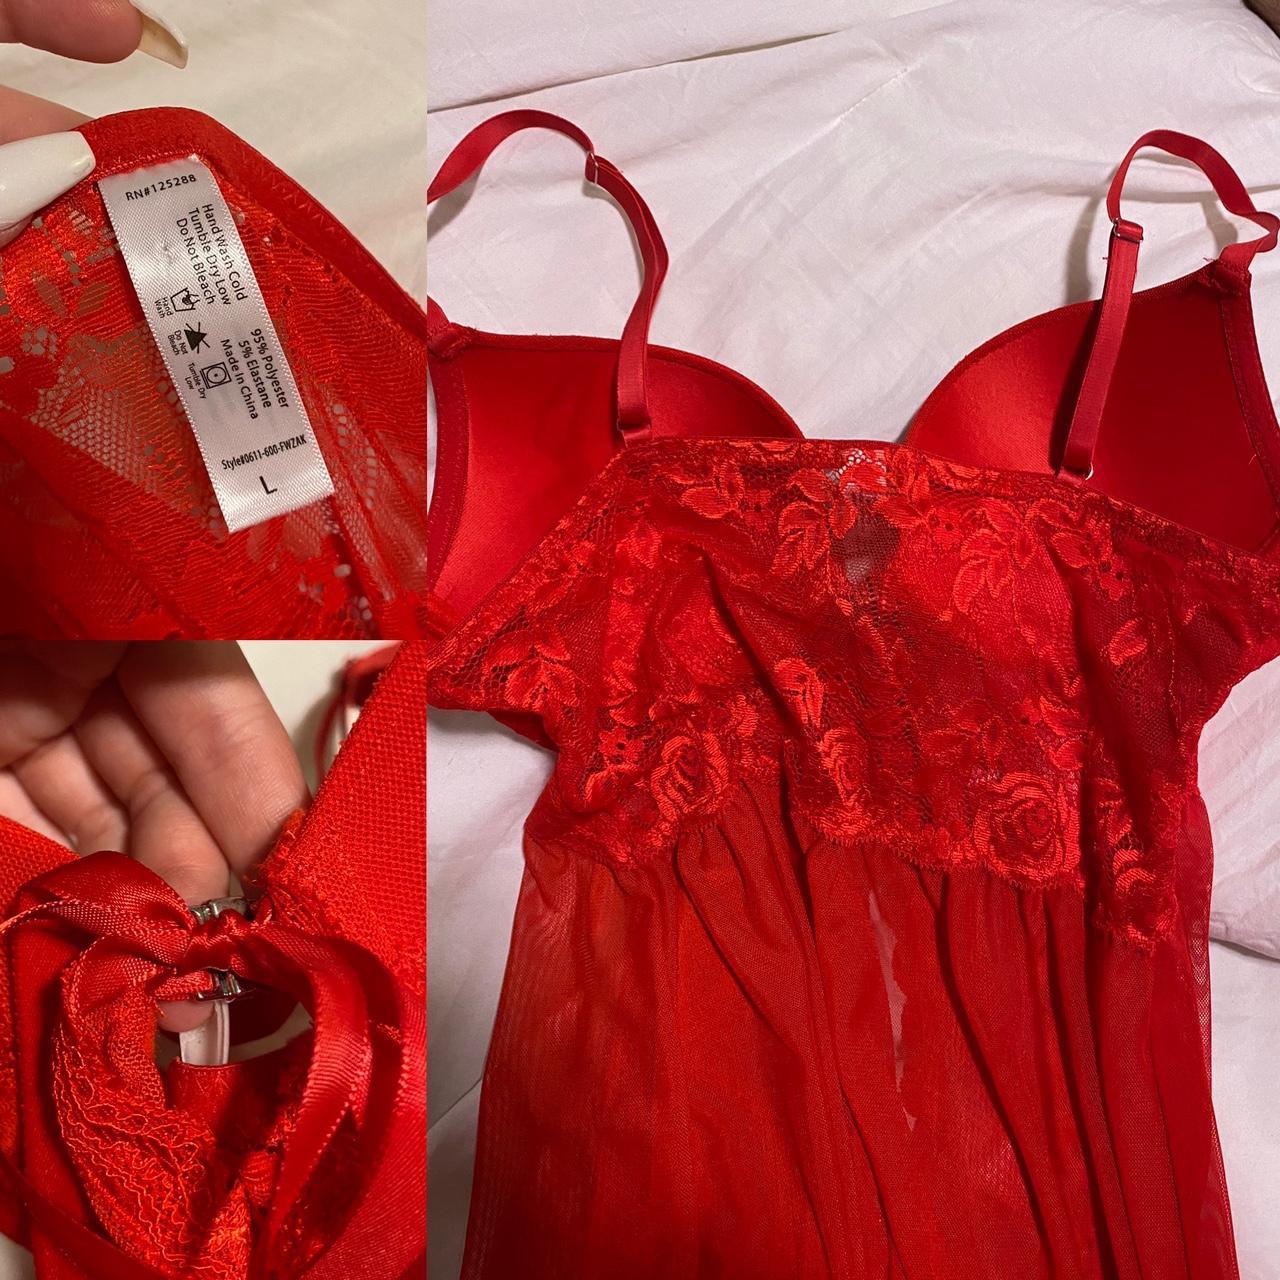 Cherry Red Babydoll Chemise Perfect condition... - Depop